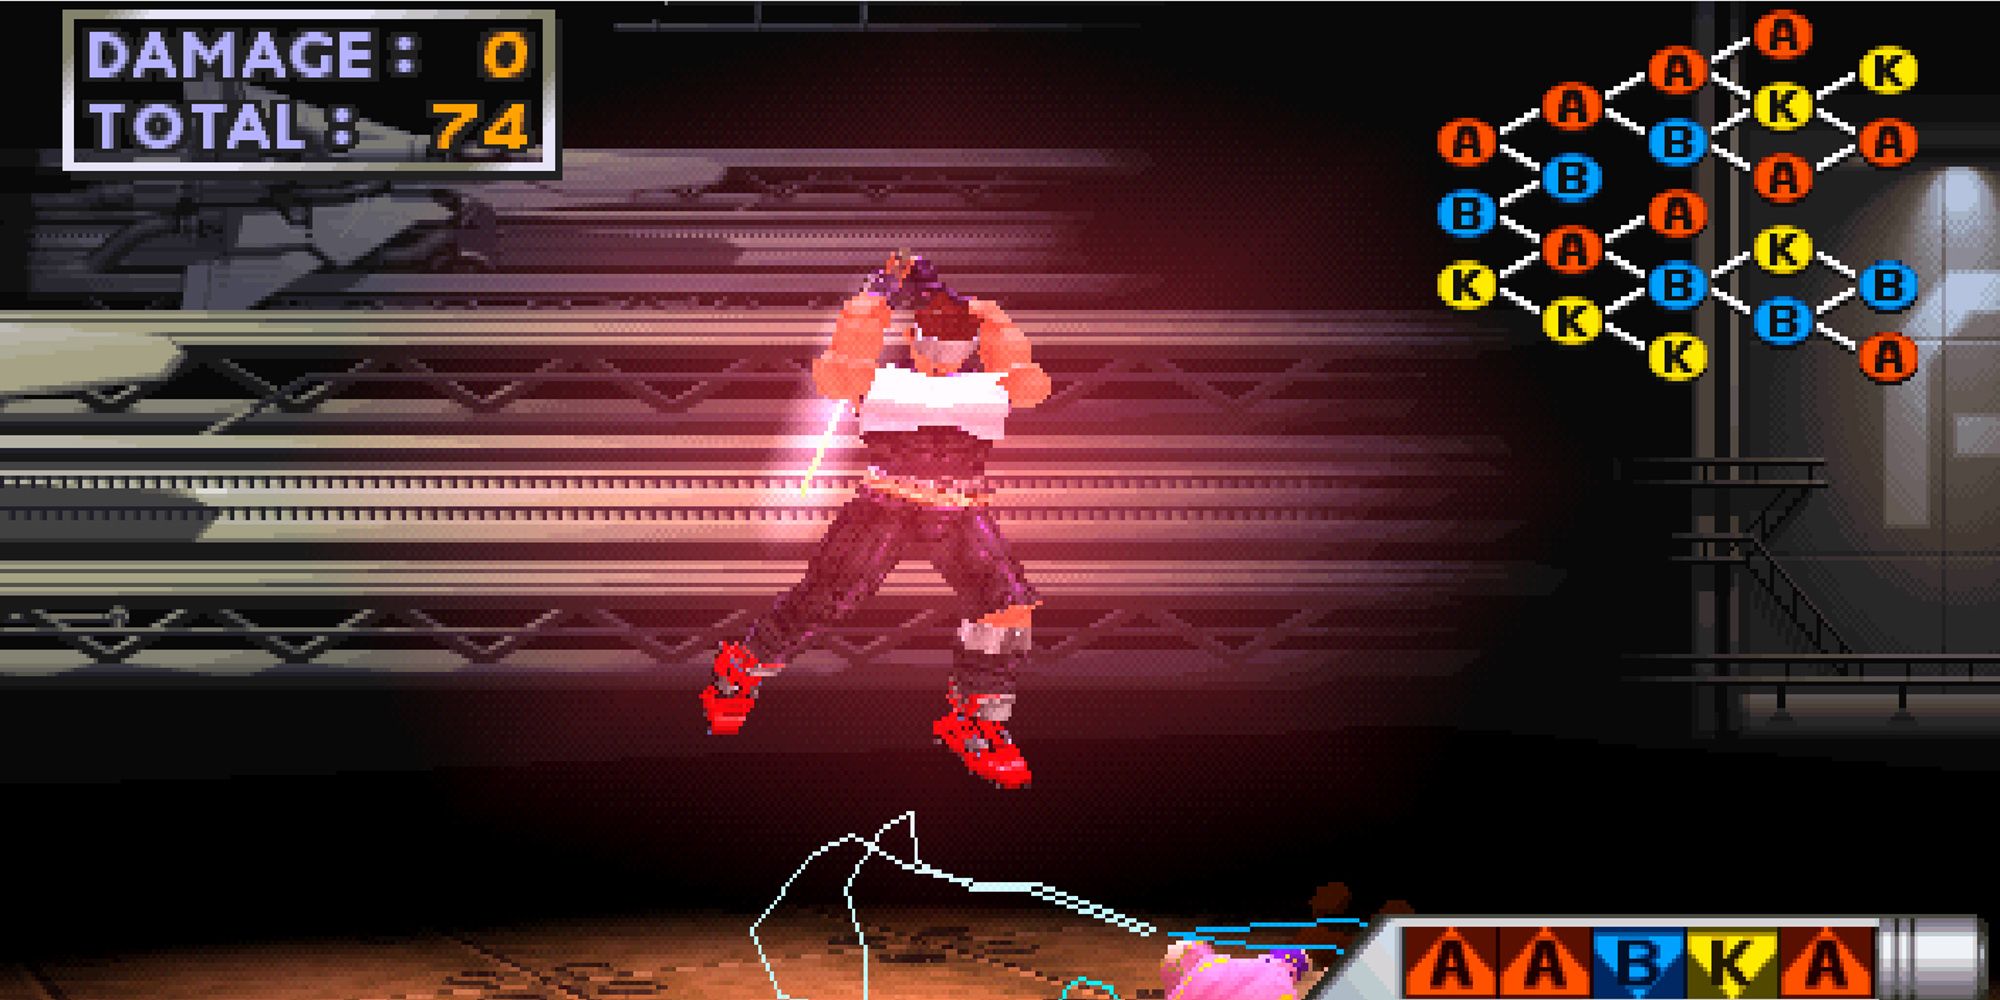 Hayato rises into the air with a glowing lightsaber on a spaceship base in Star Gladiator.